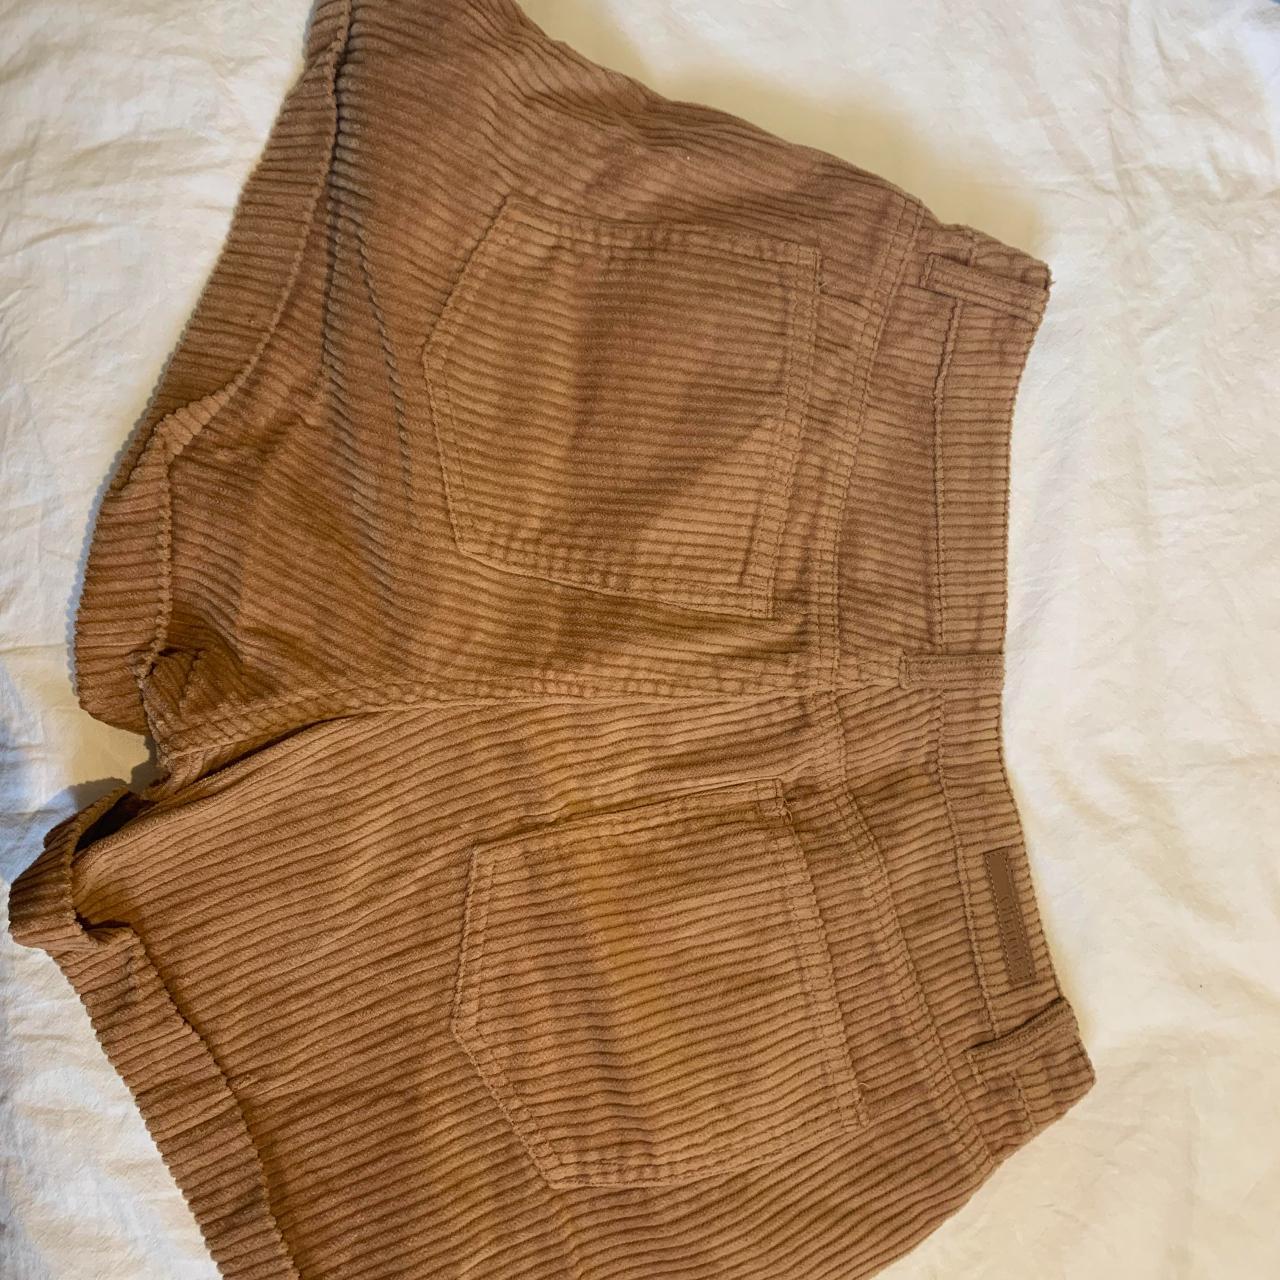 GHANDA corduroy shorts!! so cute with any top and... - Depop